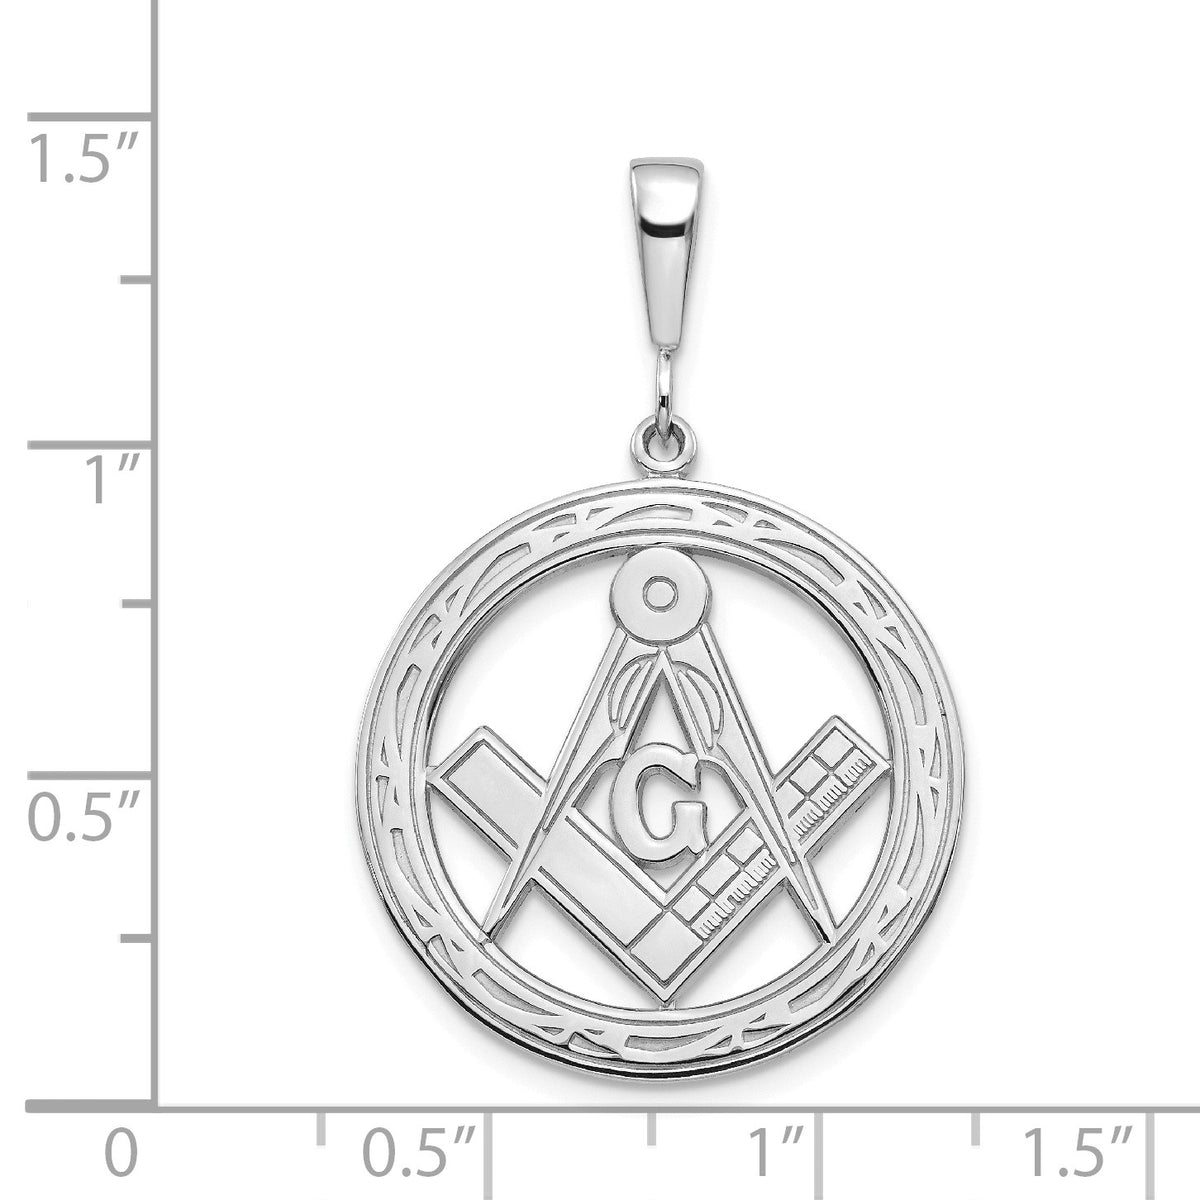 Alternate view of the 14k White Gold Masonic Circle Pendant, 23mm (7/8 Inch) by The Black Bow Jewelry Co.